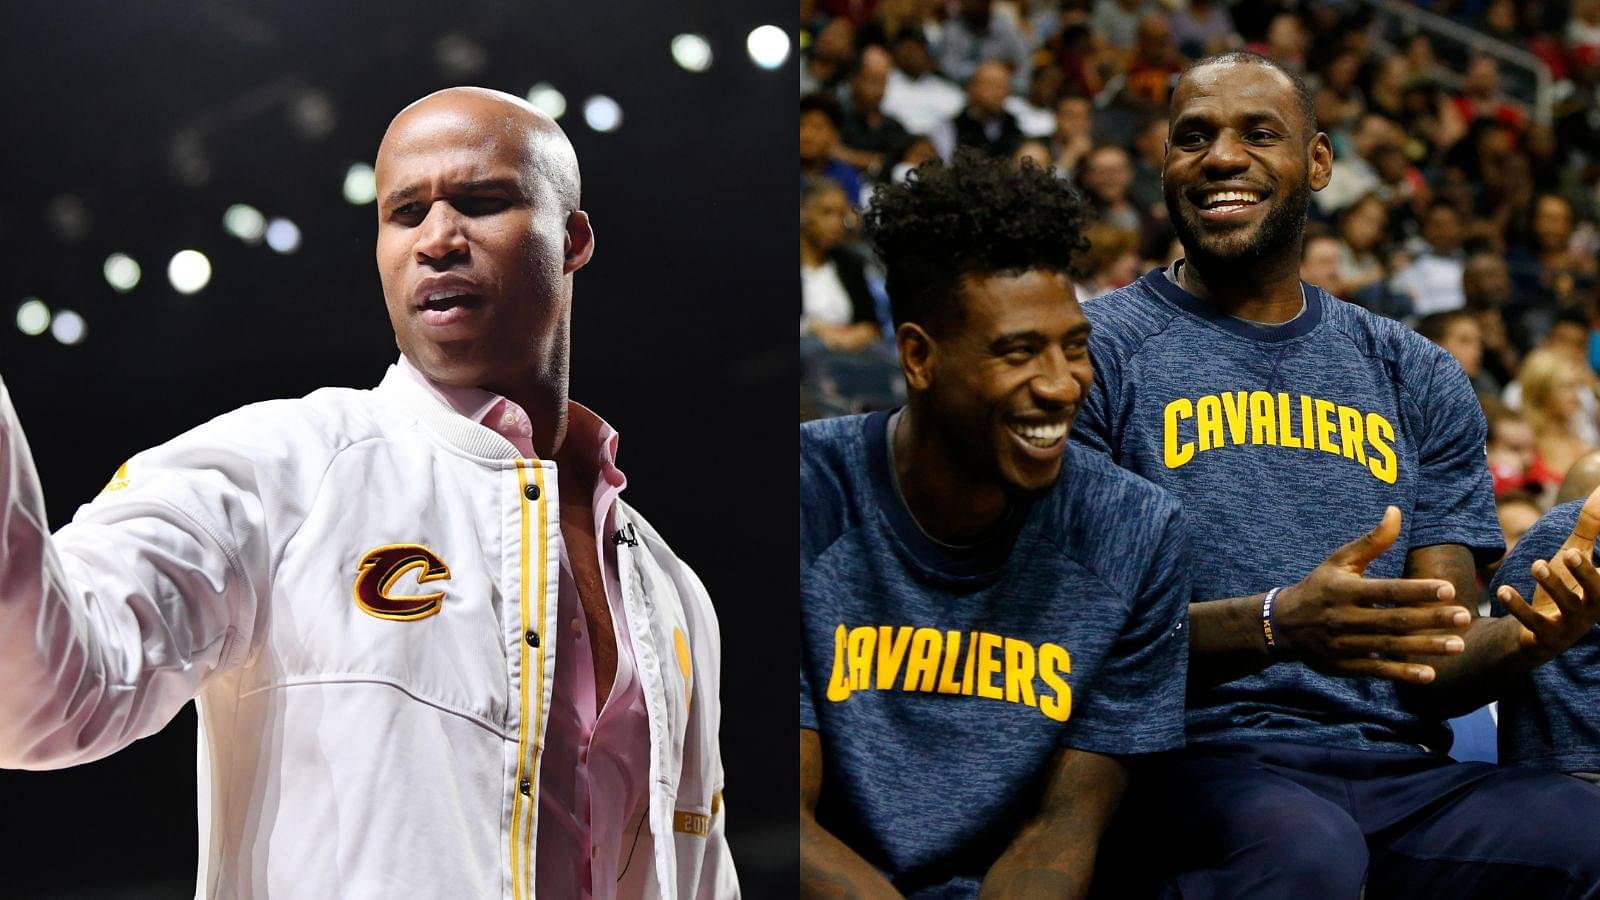 "Richard Jefferson looks like the thumb dude from Spy Kids!": Former LeBron James teammate is tired of fans trolling him for his bald head